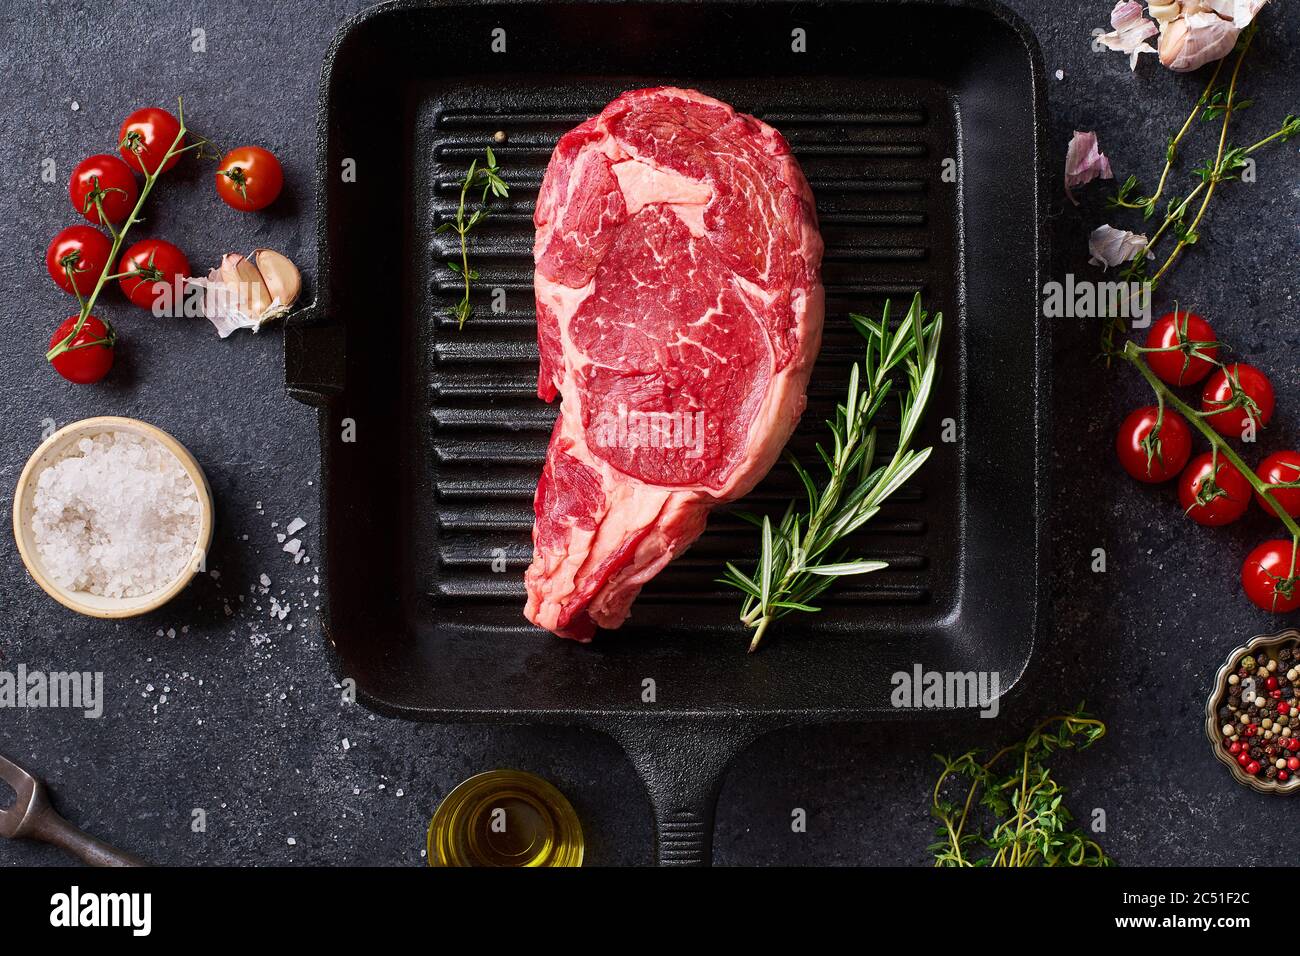 Top view Black Angus prime beef rib eye steak on cast iron grill skillet with fresh rosemary, cherry tomatoes, olive oil and spices. Creative layout w Stock Photo